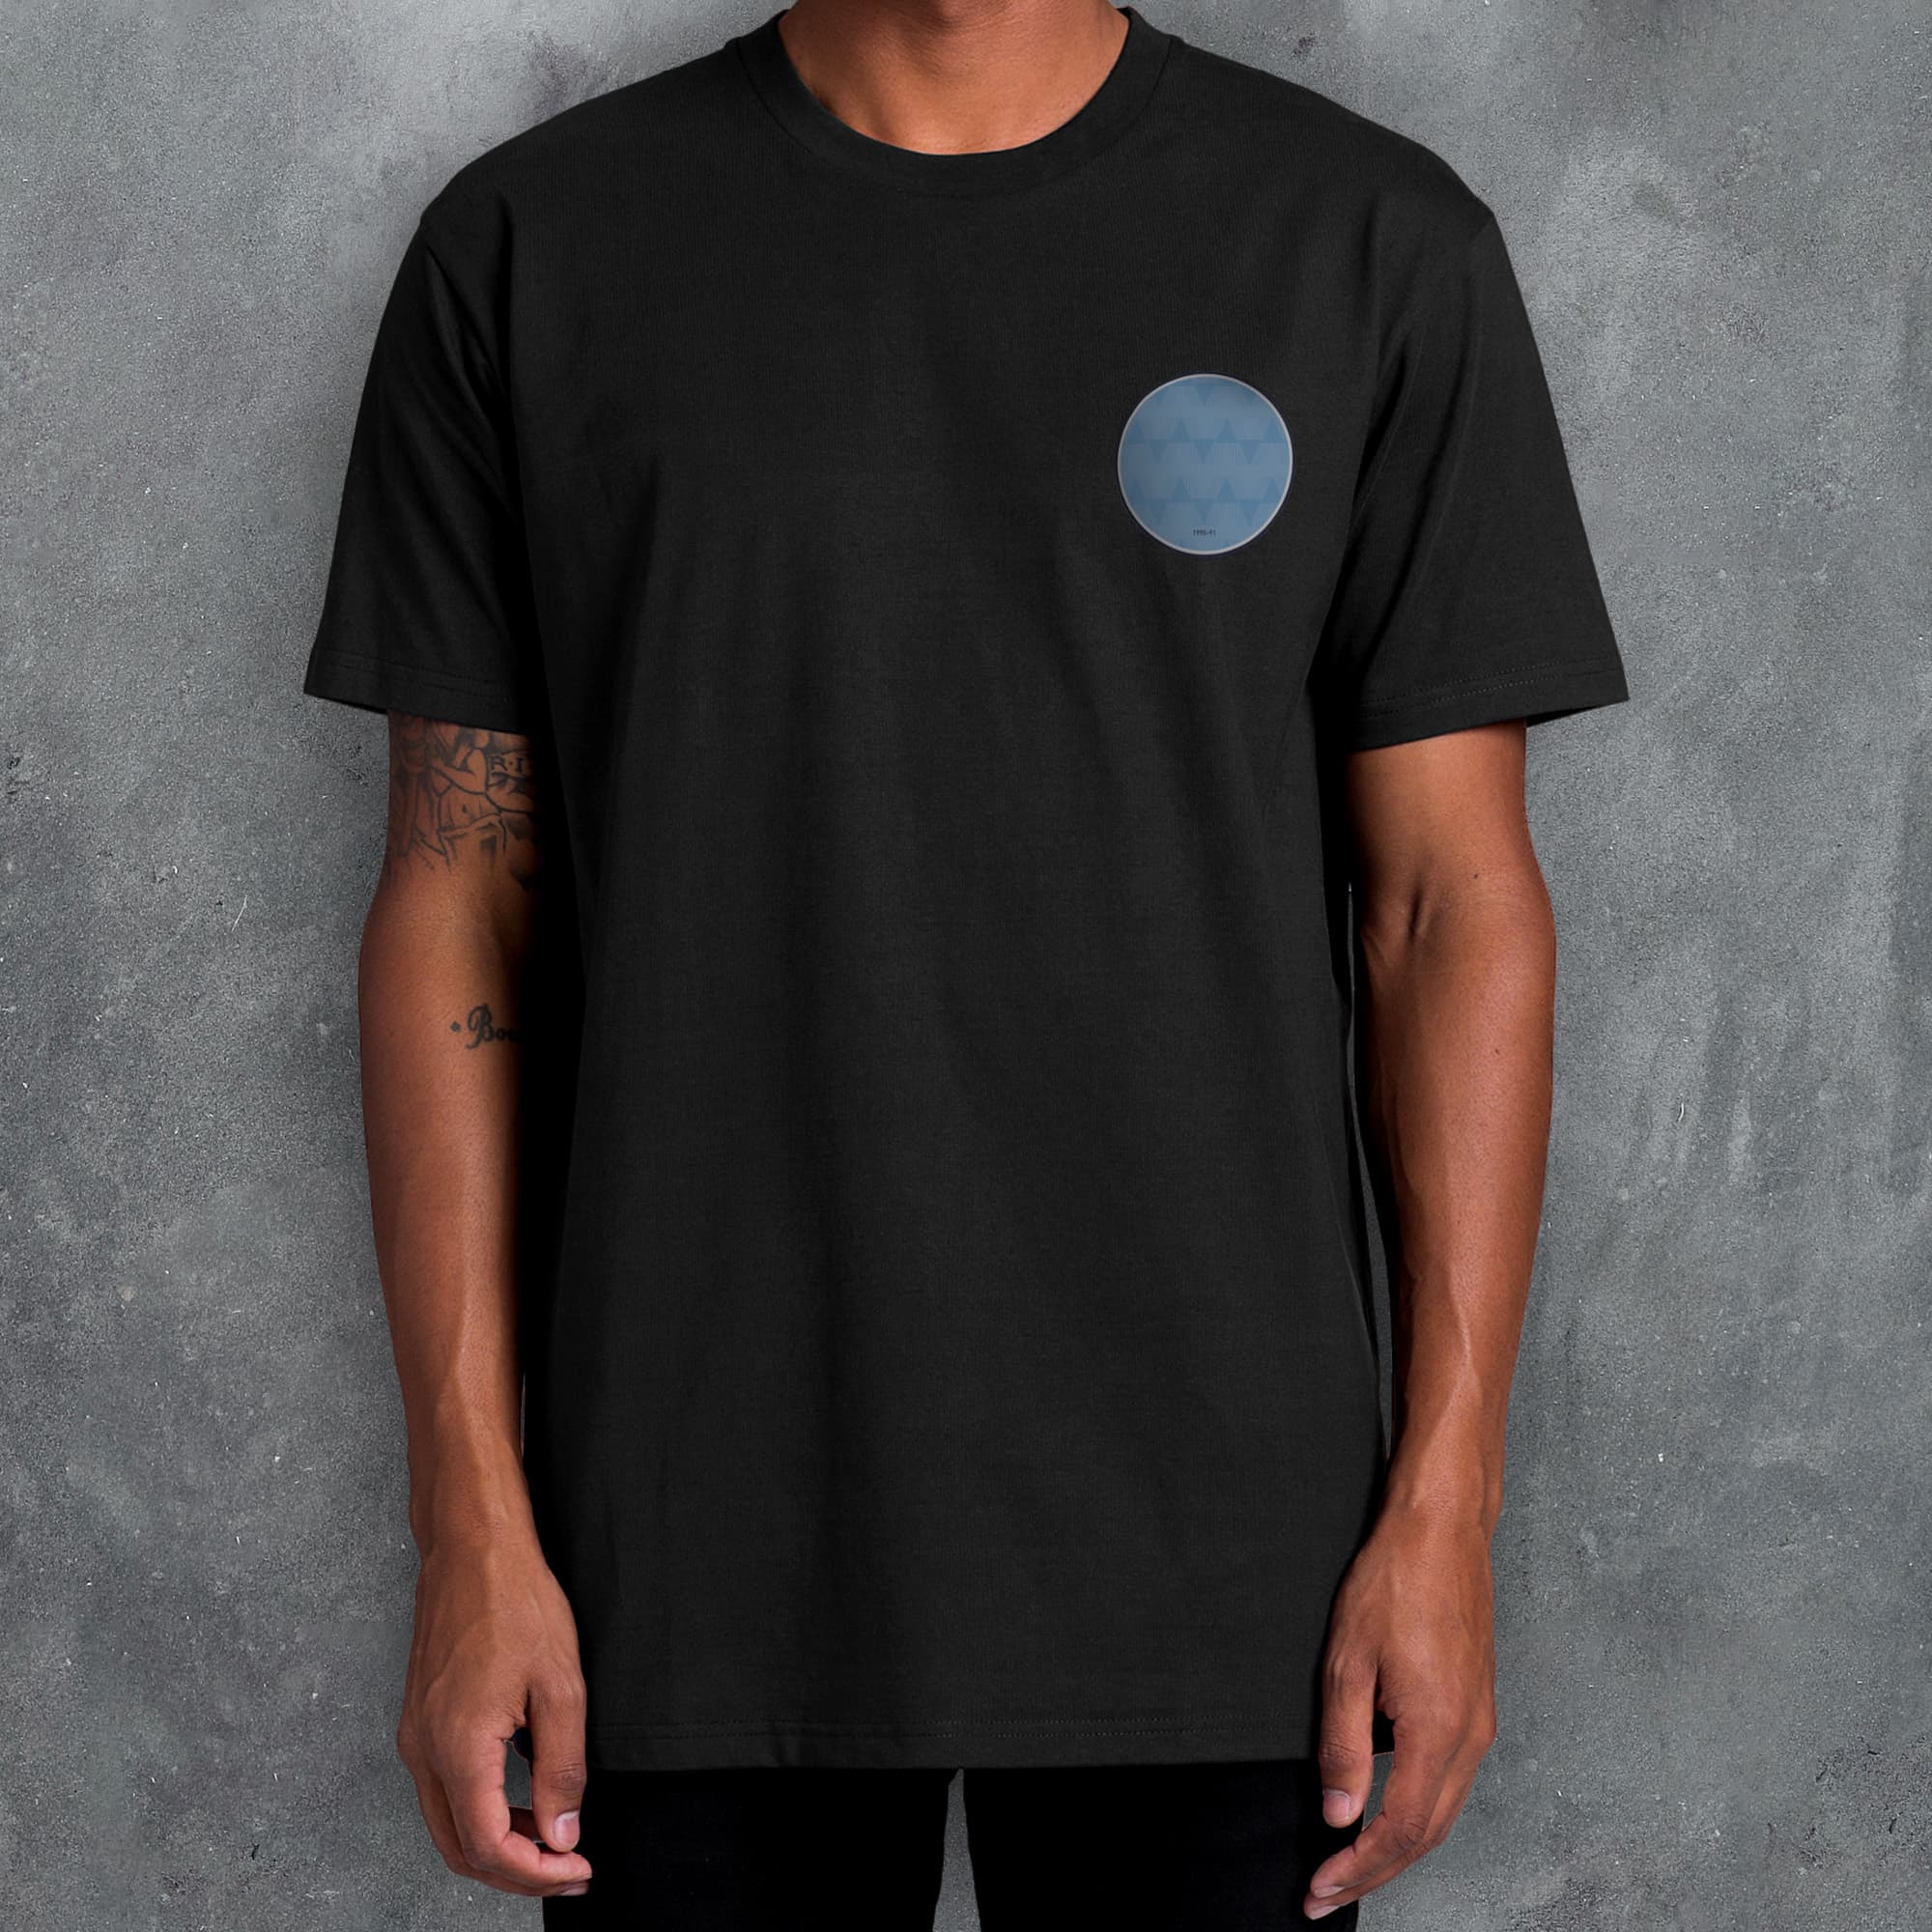 a man wearing a black t - shirt with a blue circle on it